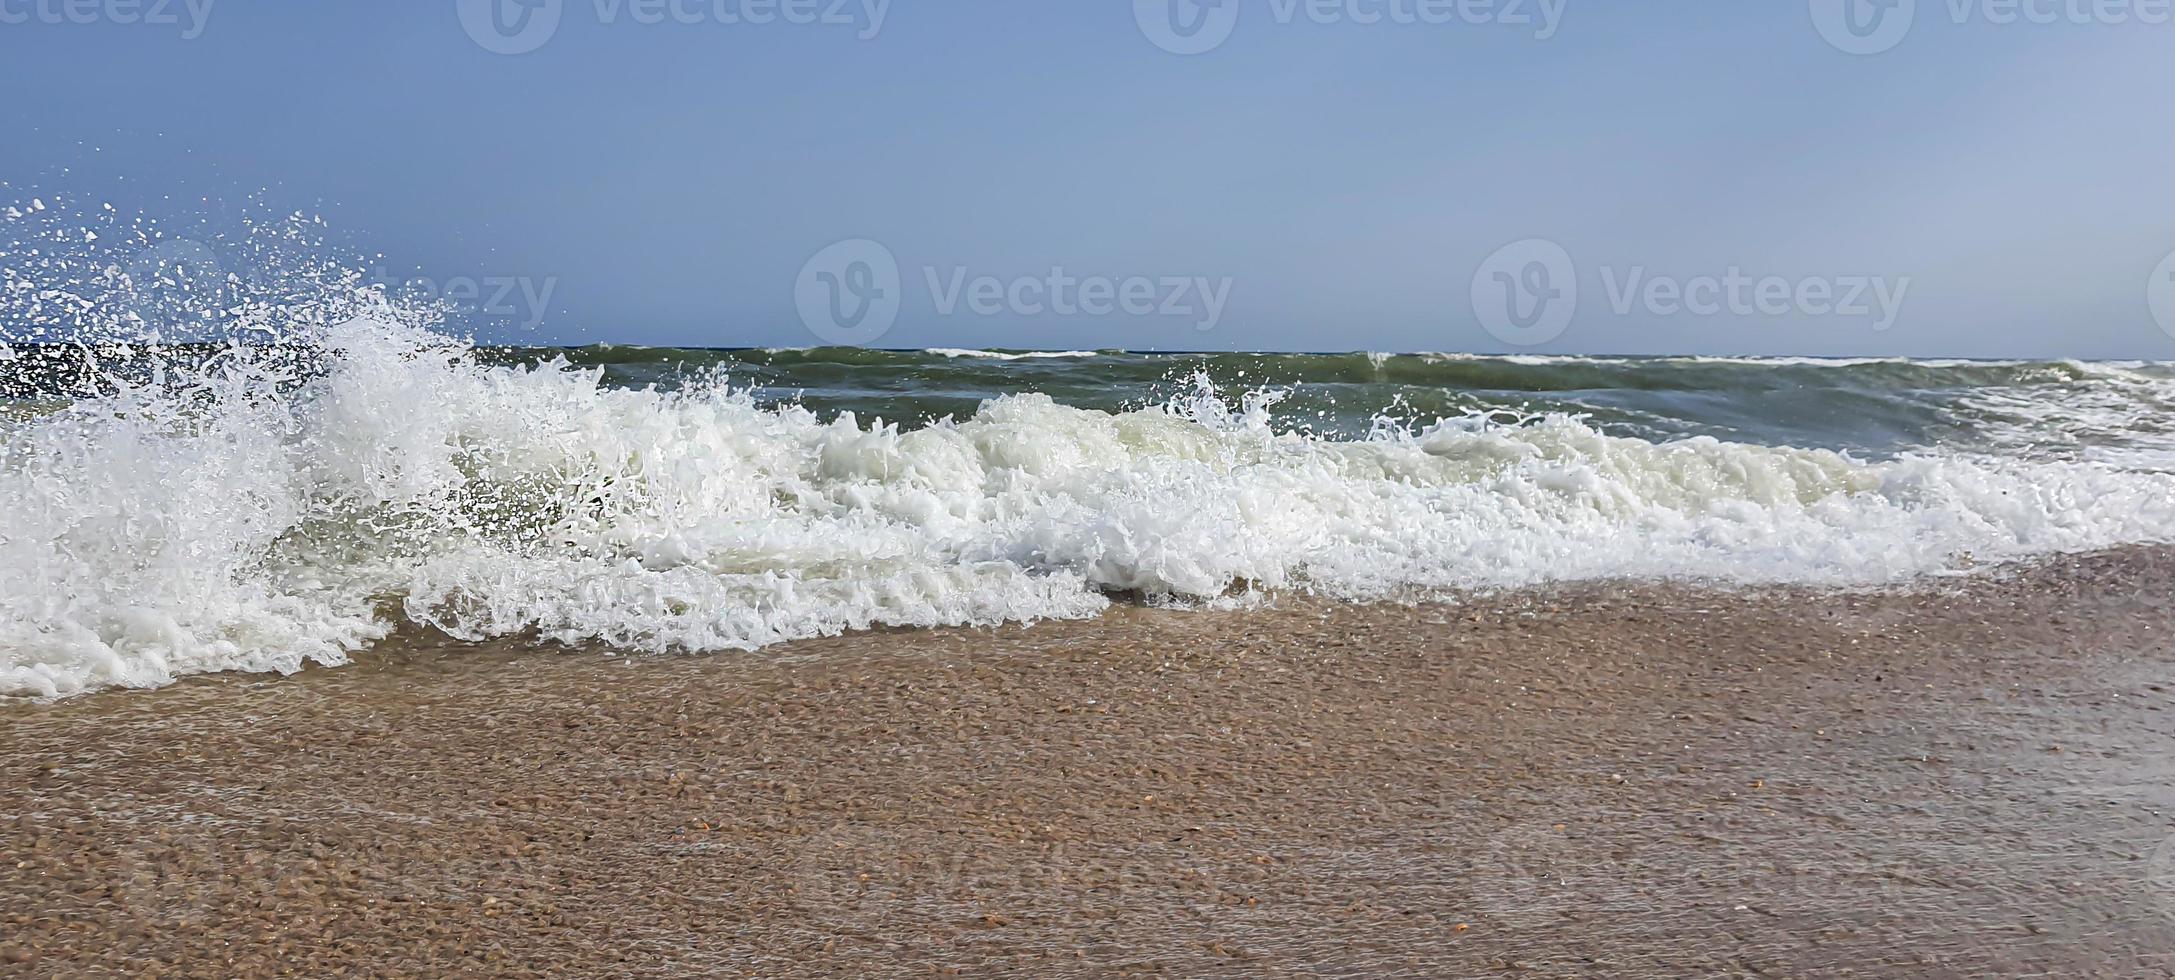 Seascape. Azure color of water, waves foaming on the shore. photo